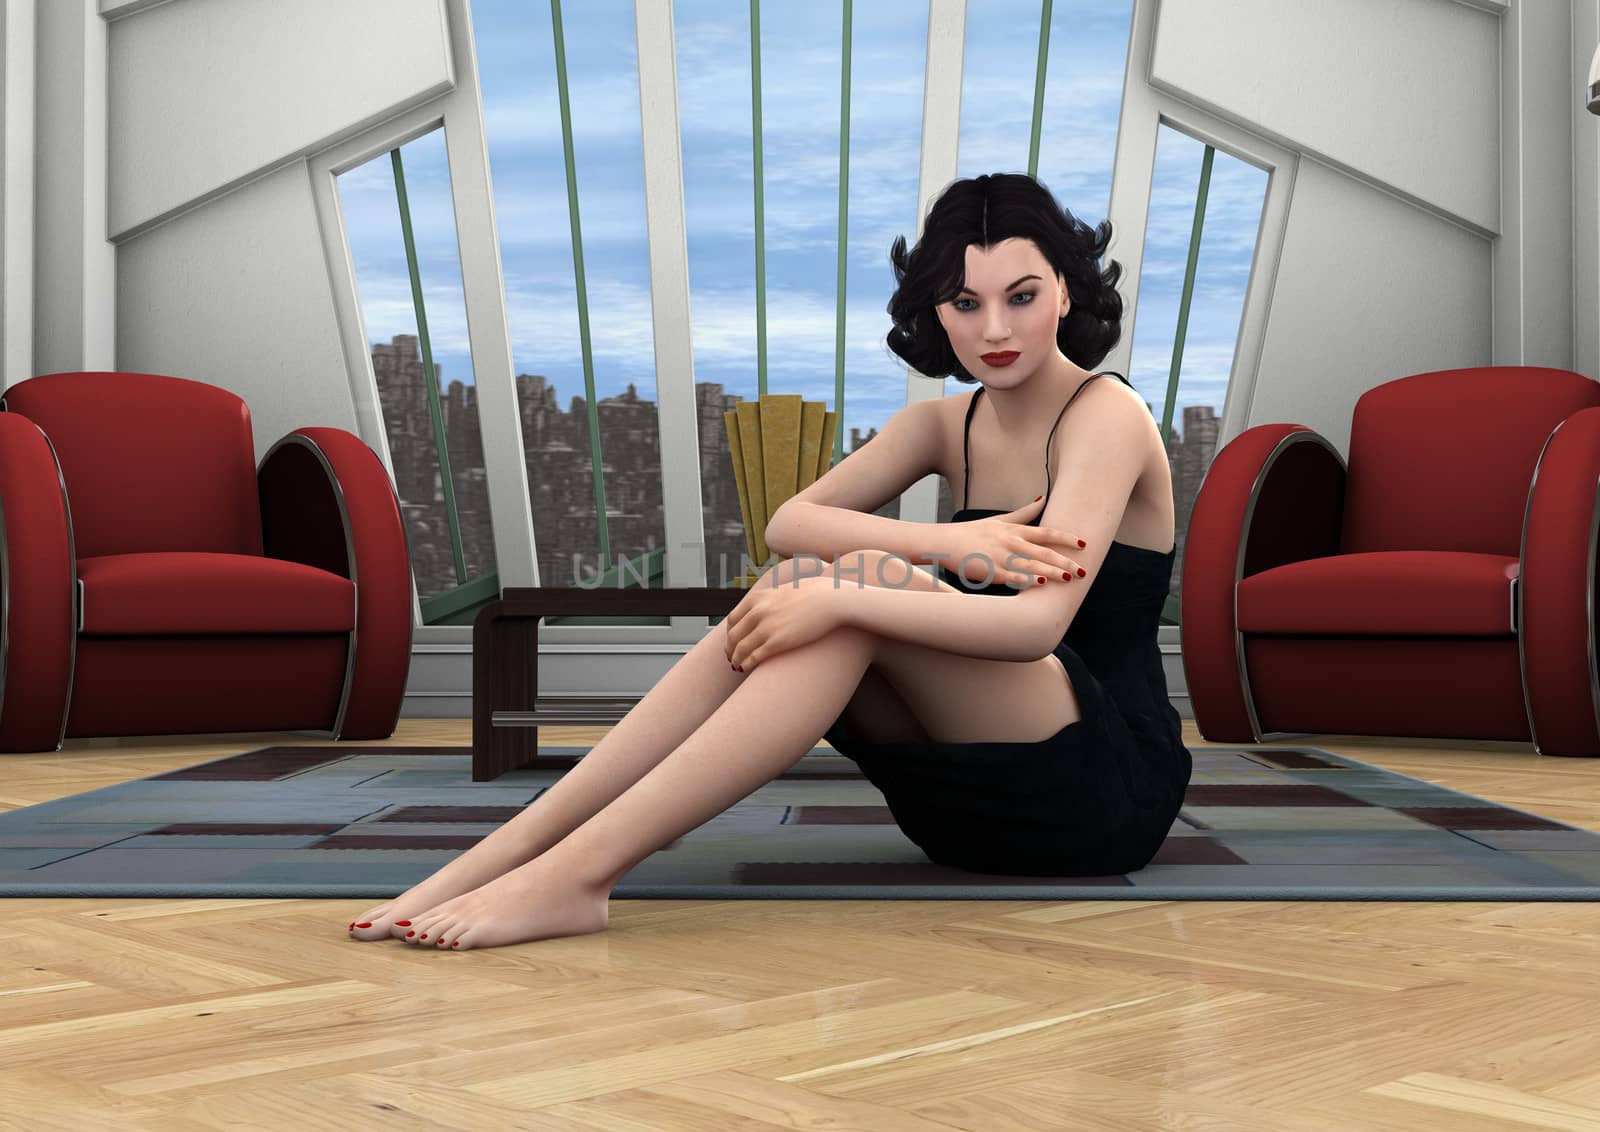 3D digital render of a beautiful woman sitting on the floor of a retro style decorated room